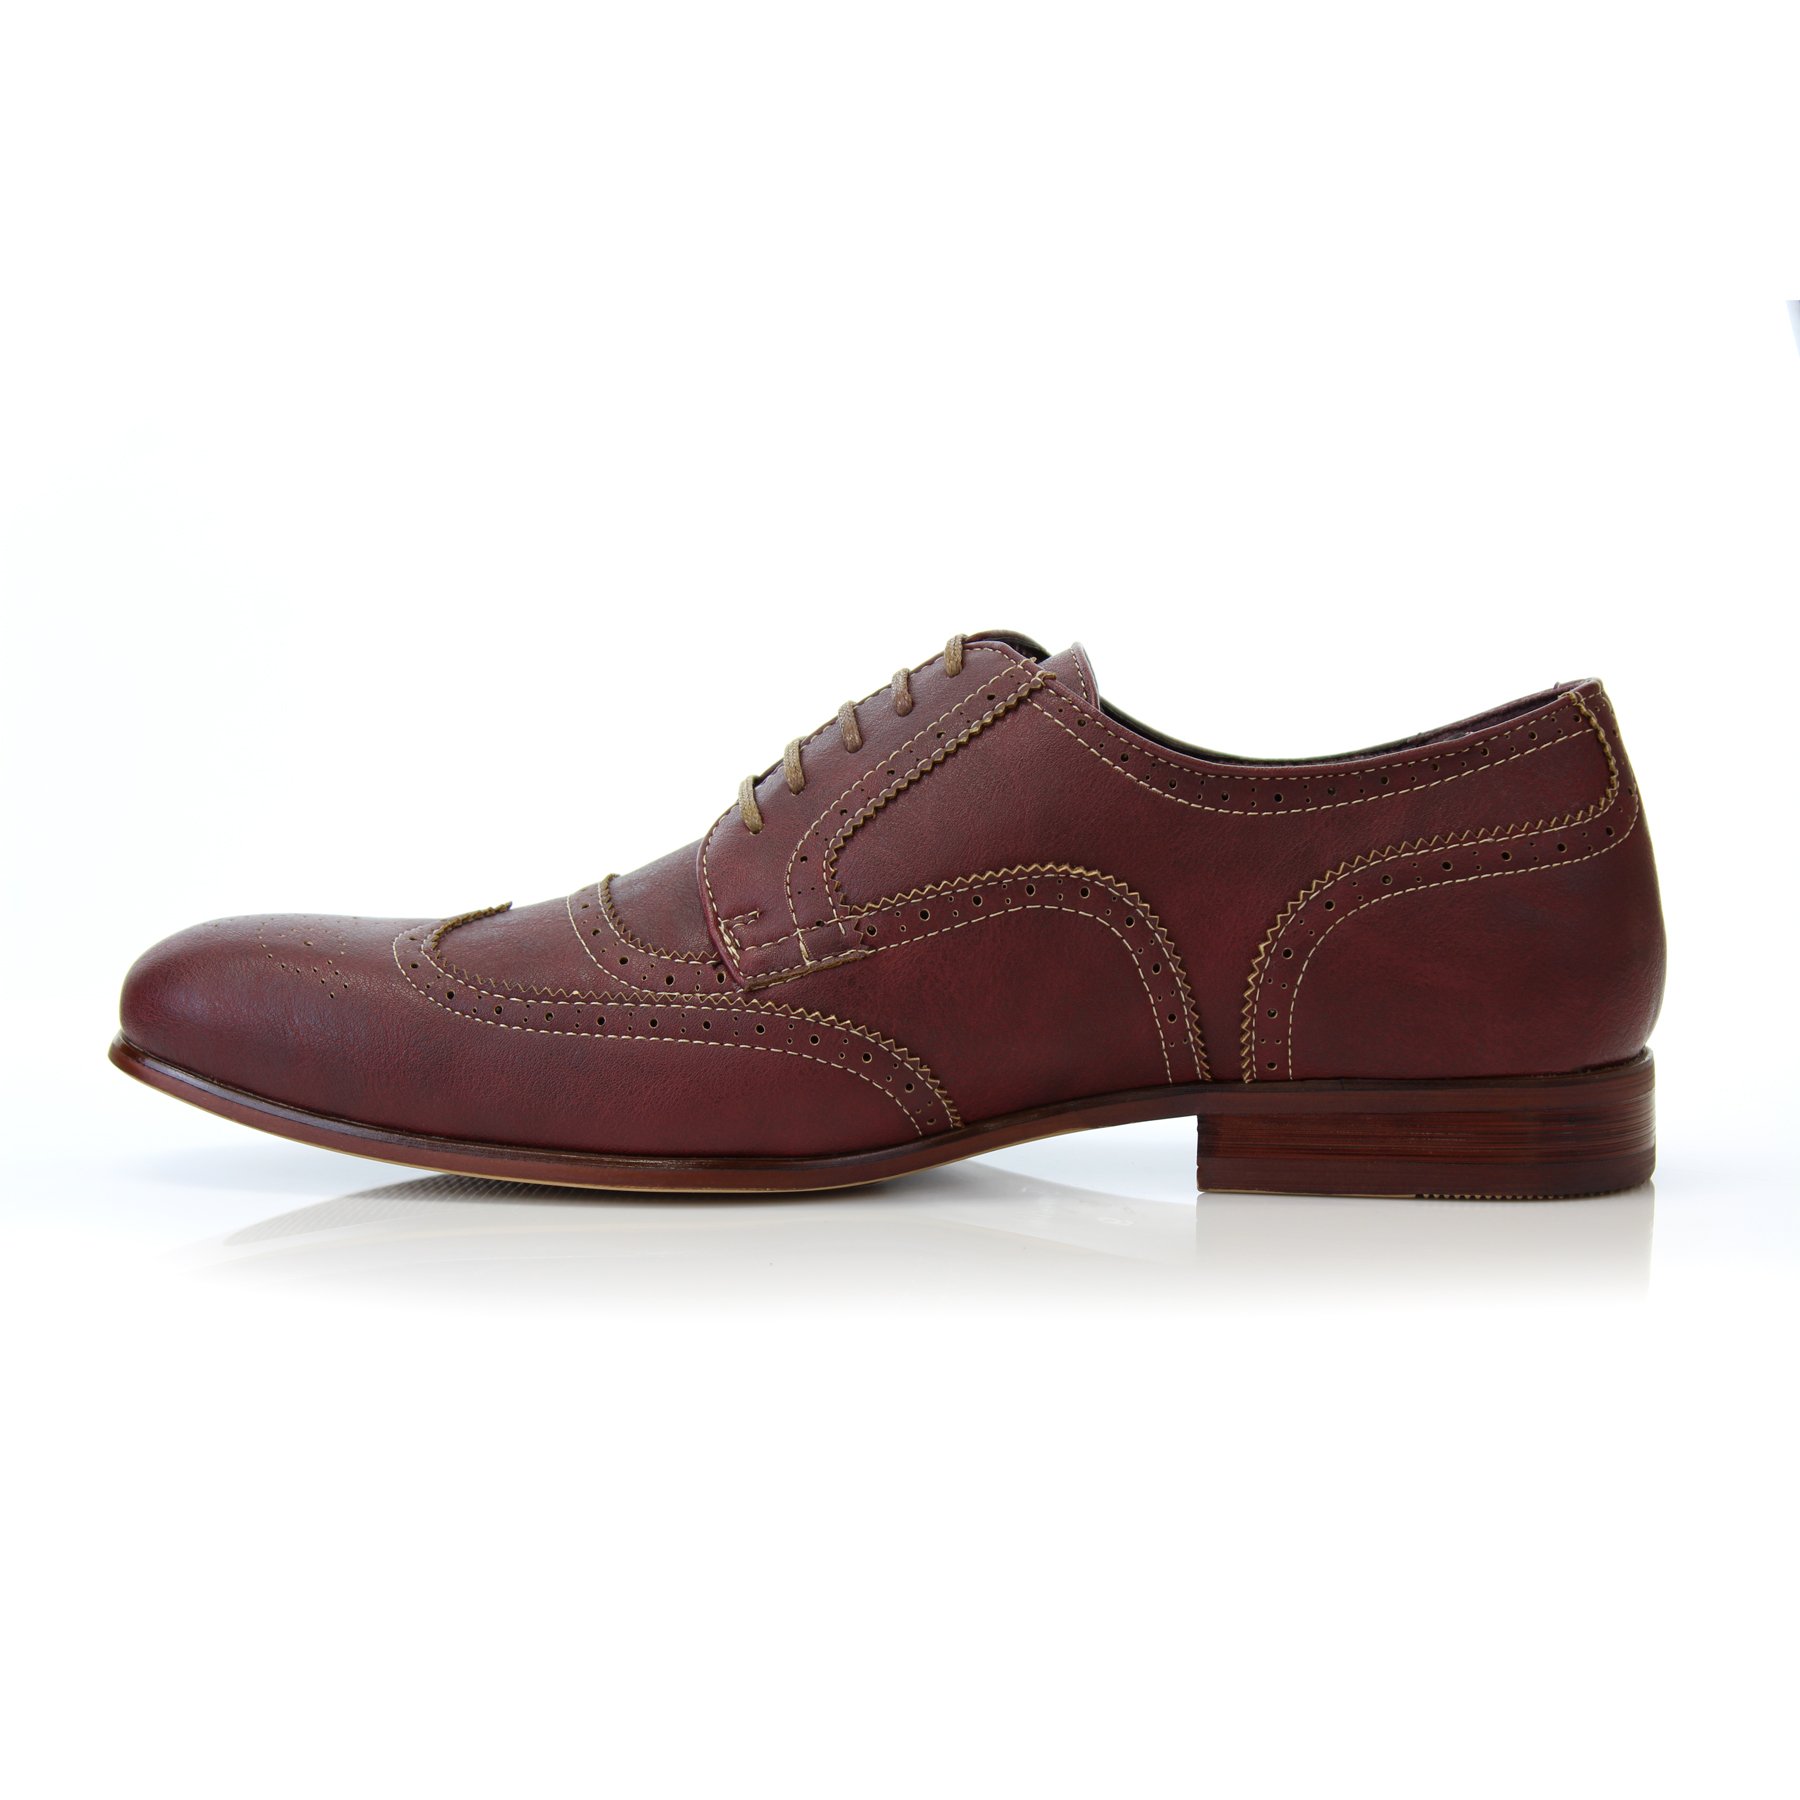 Ferro Aldo Vincent MFA139356E Mens Classic Perforated Duo-Texture Lace-up Wingtip Oxford Dress Shoes - image 2 of 3